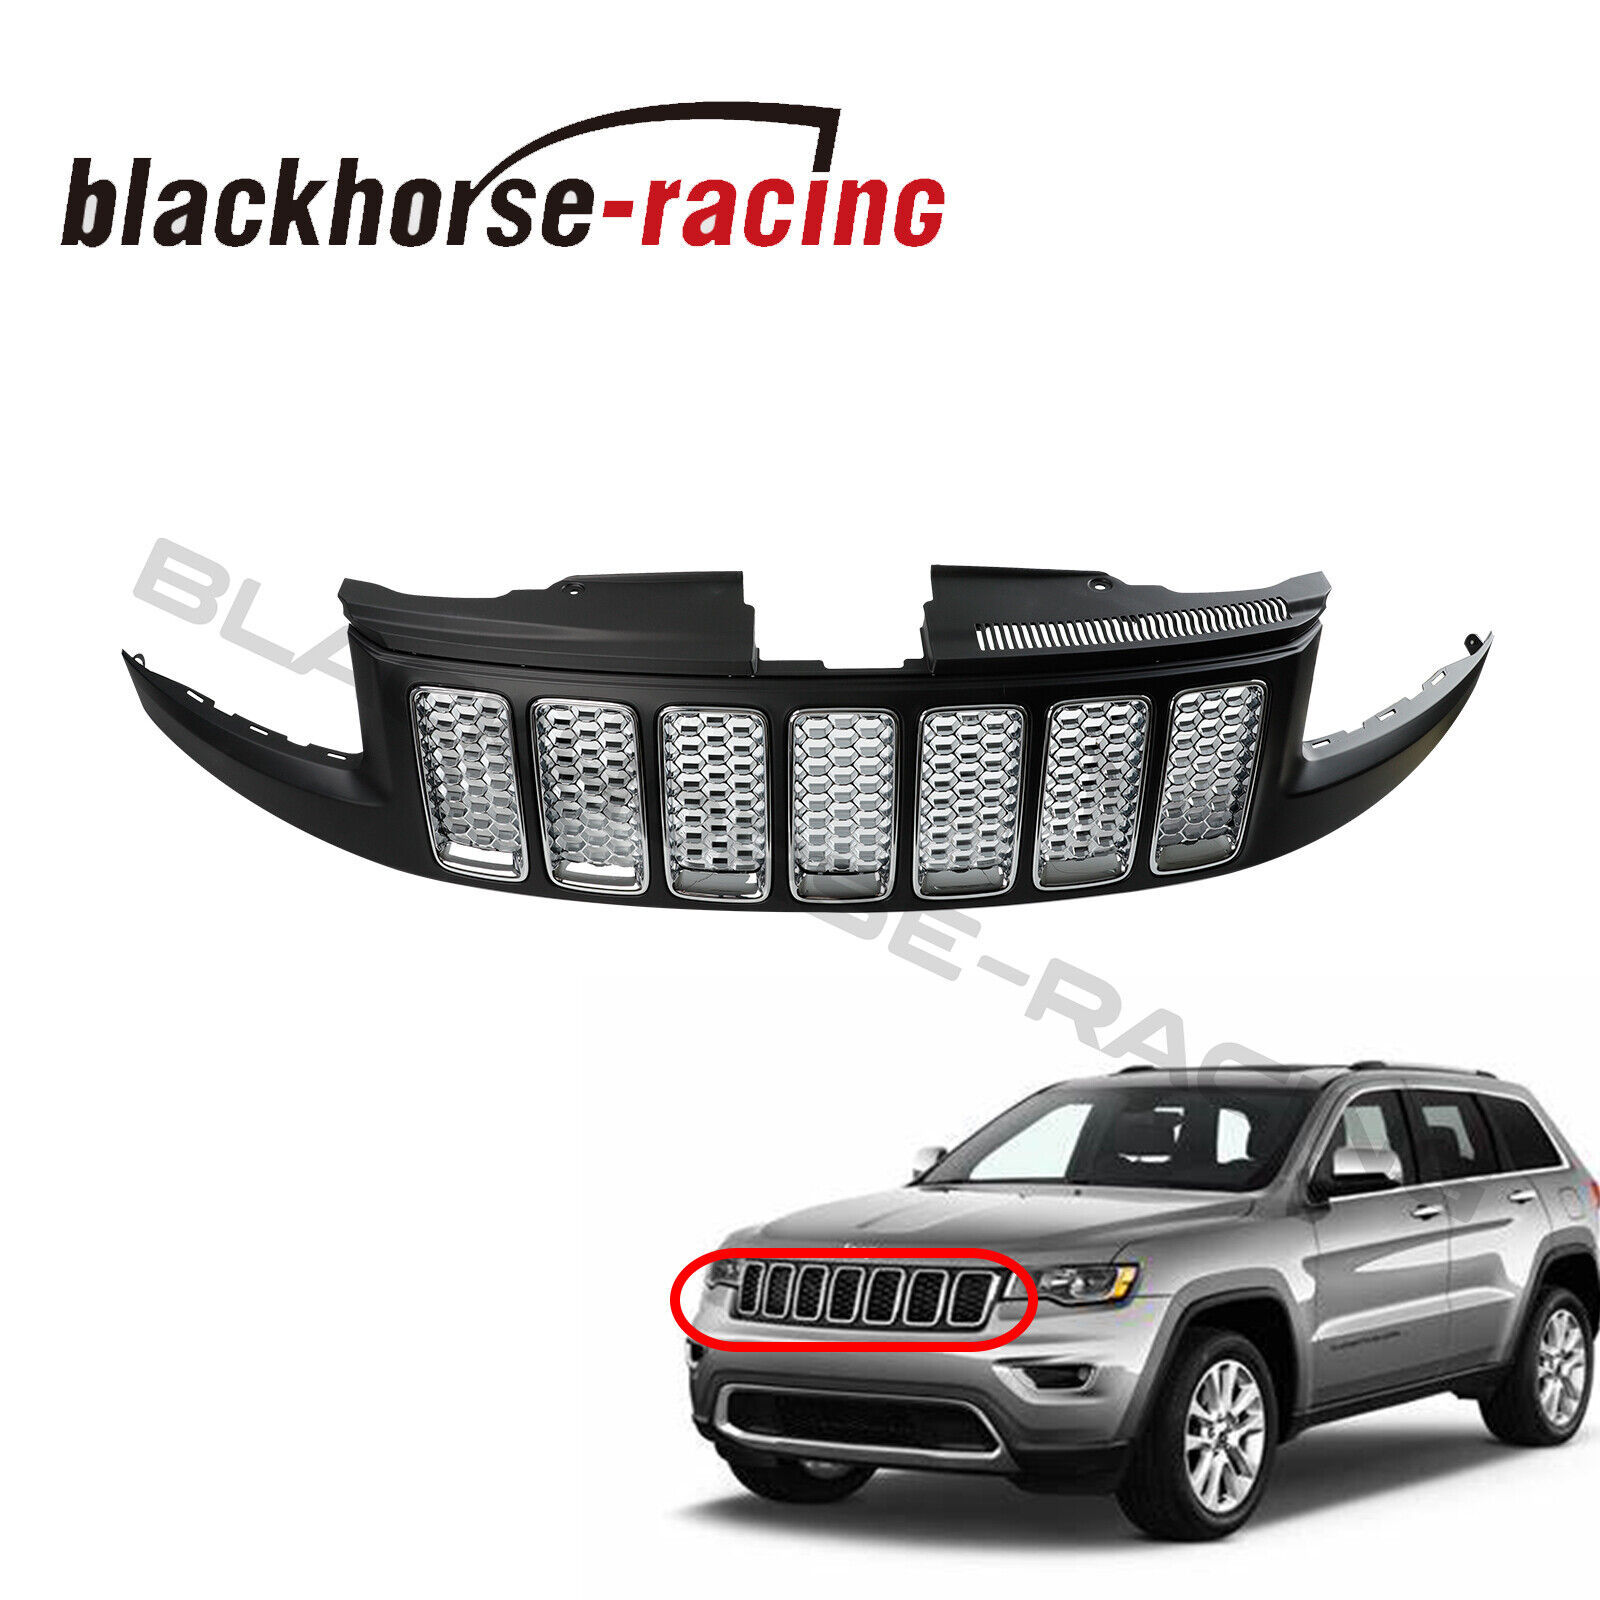 FRONT BUMPER HONEYCOMB MESH GRILLE GRILL FOR 14-16 JEEP GRAND CHEROKEE SRT8 TYPE - $196.25